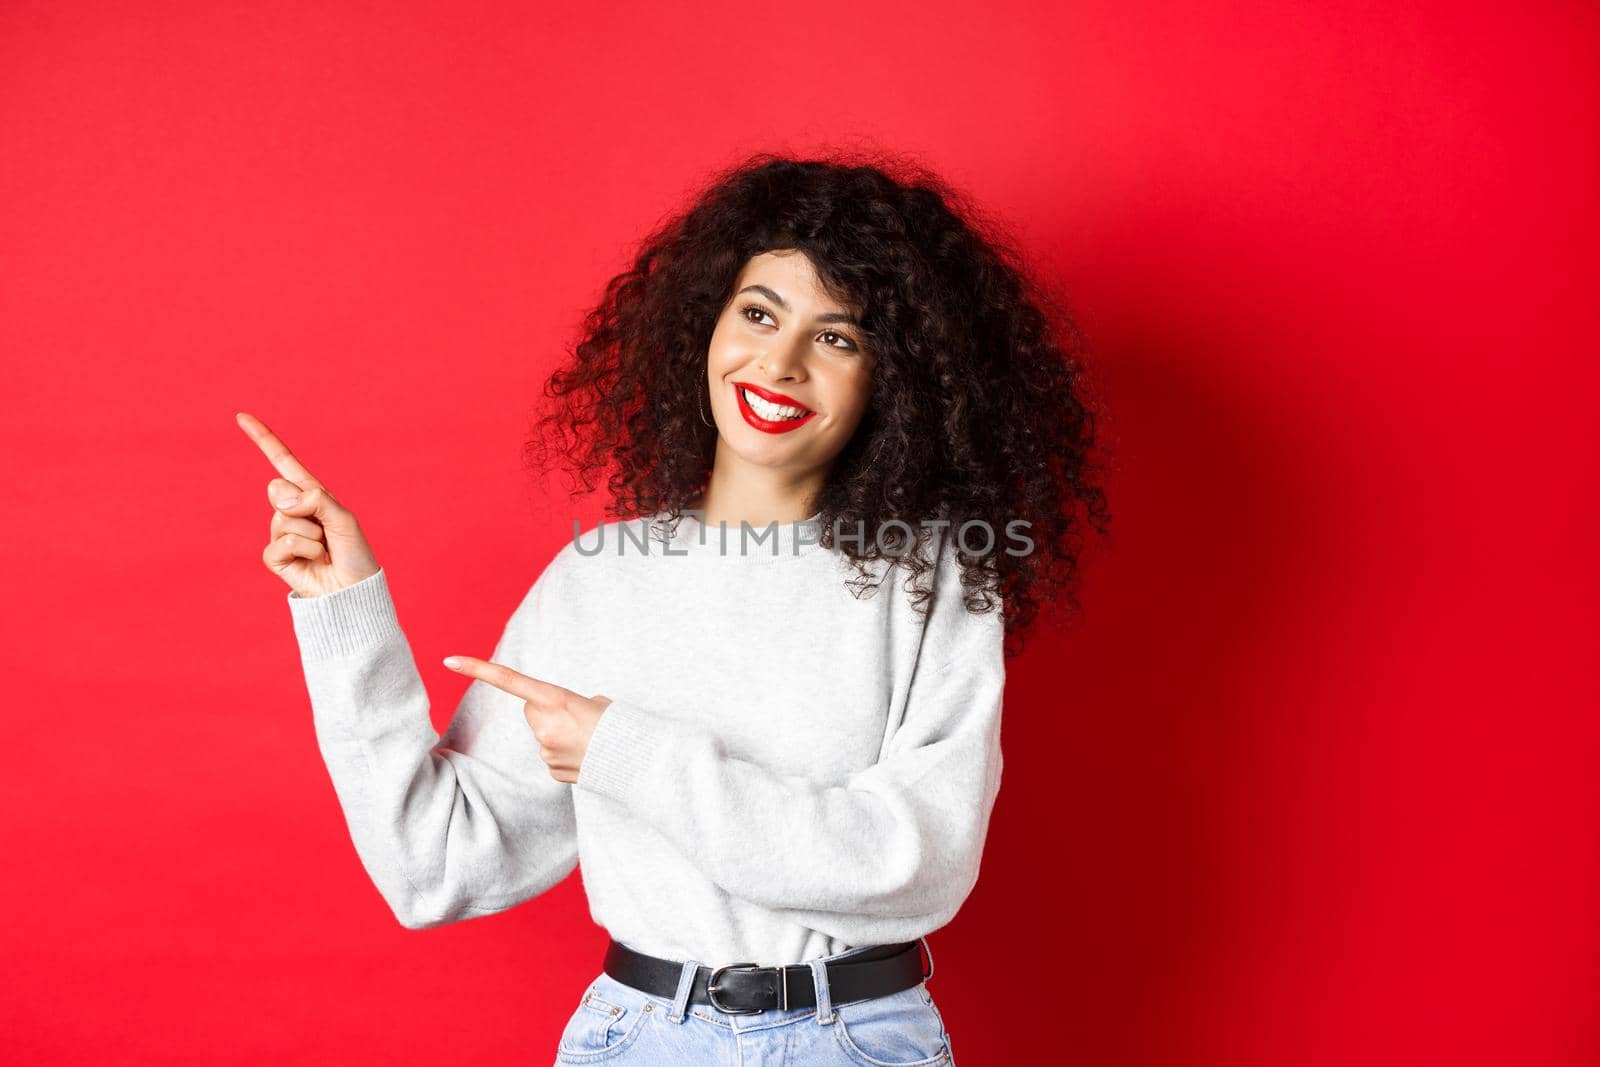 Beautiful european woman with curly hair and makeup, pointing fingers left and looking aside with dreamy smile, checking out promotion deal, red background.